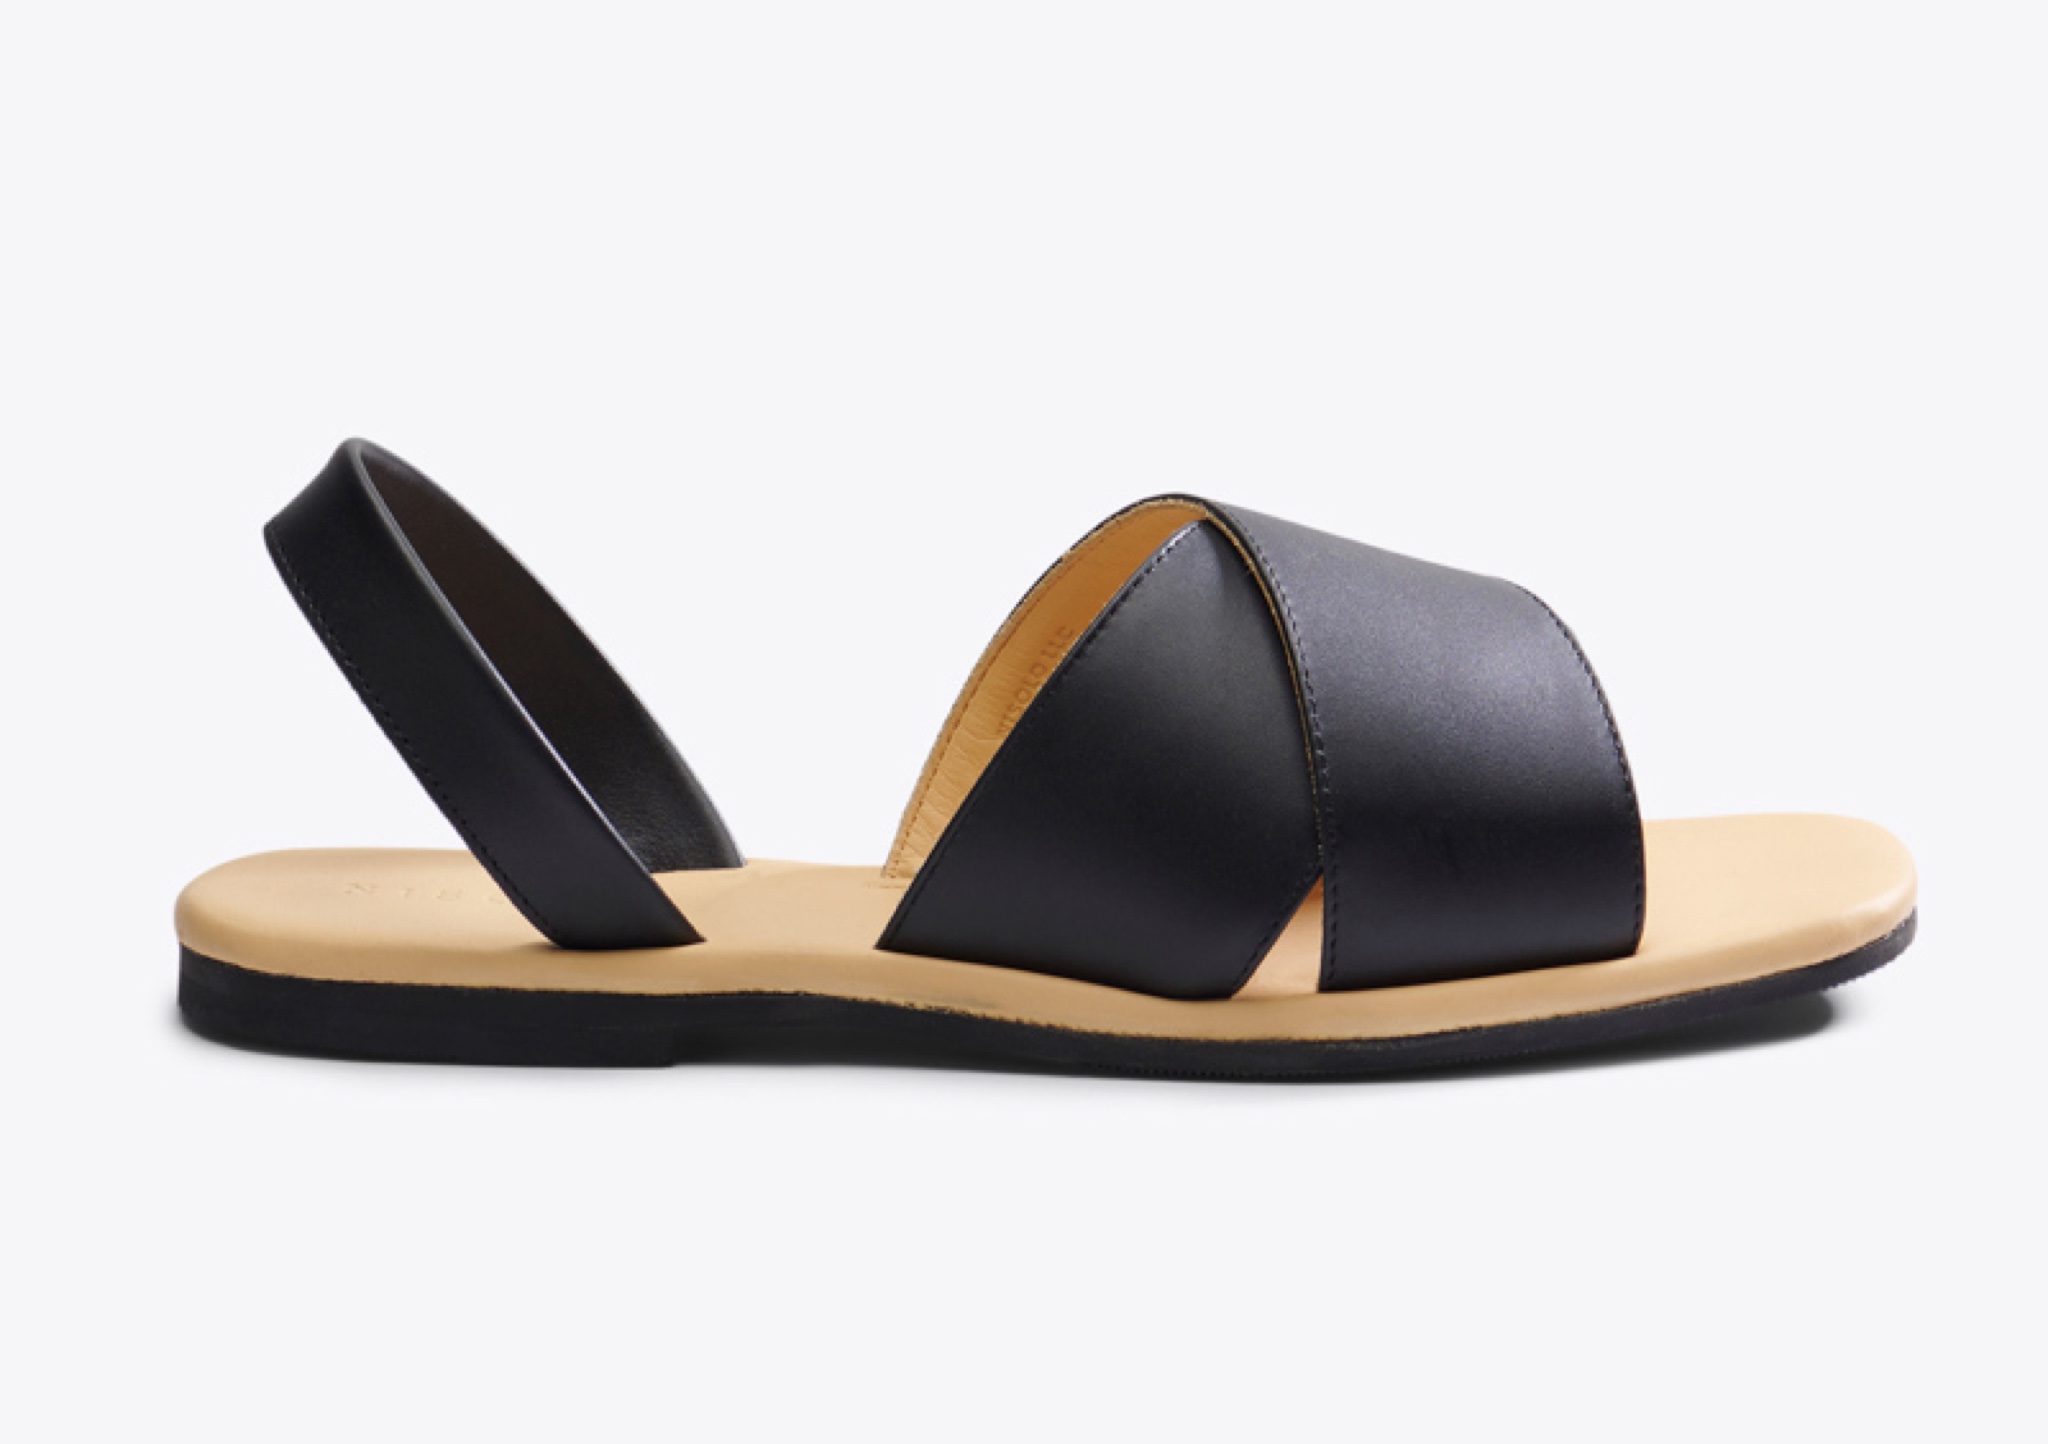 Nisolo All-Day Cross Strap Sandal Black - Every Nisolo product is built on the foundation of comfort, function, and design. 